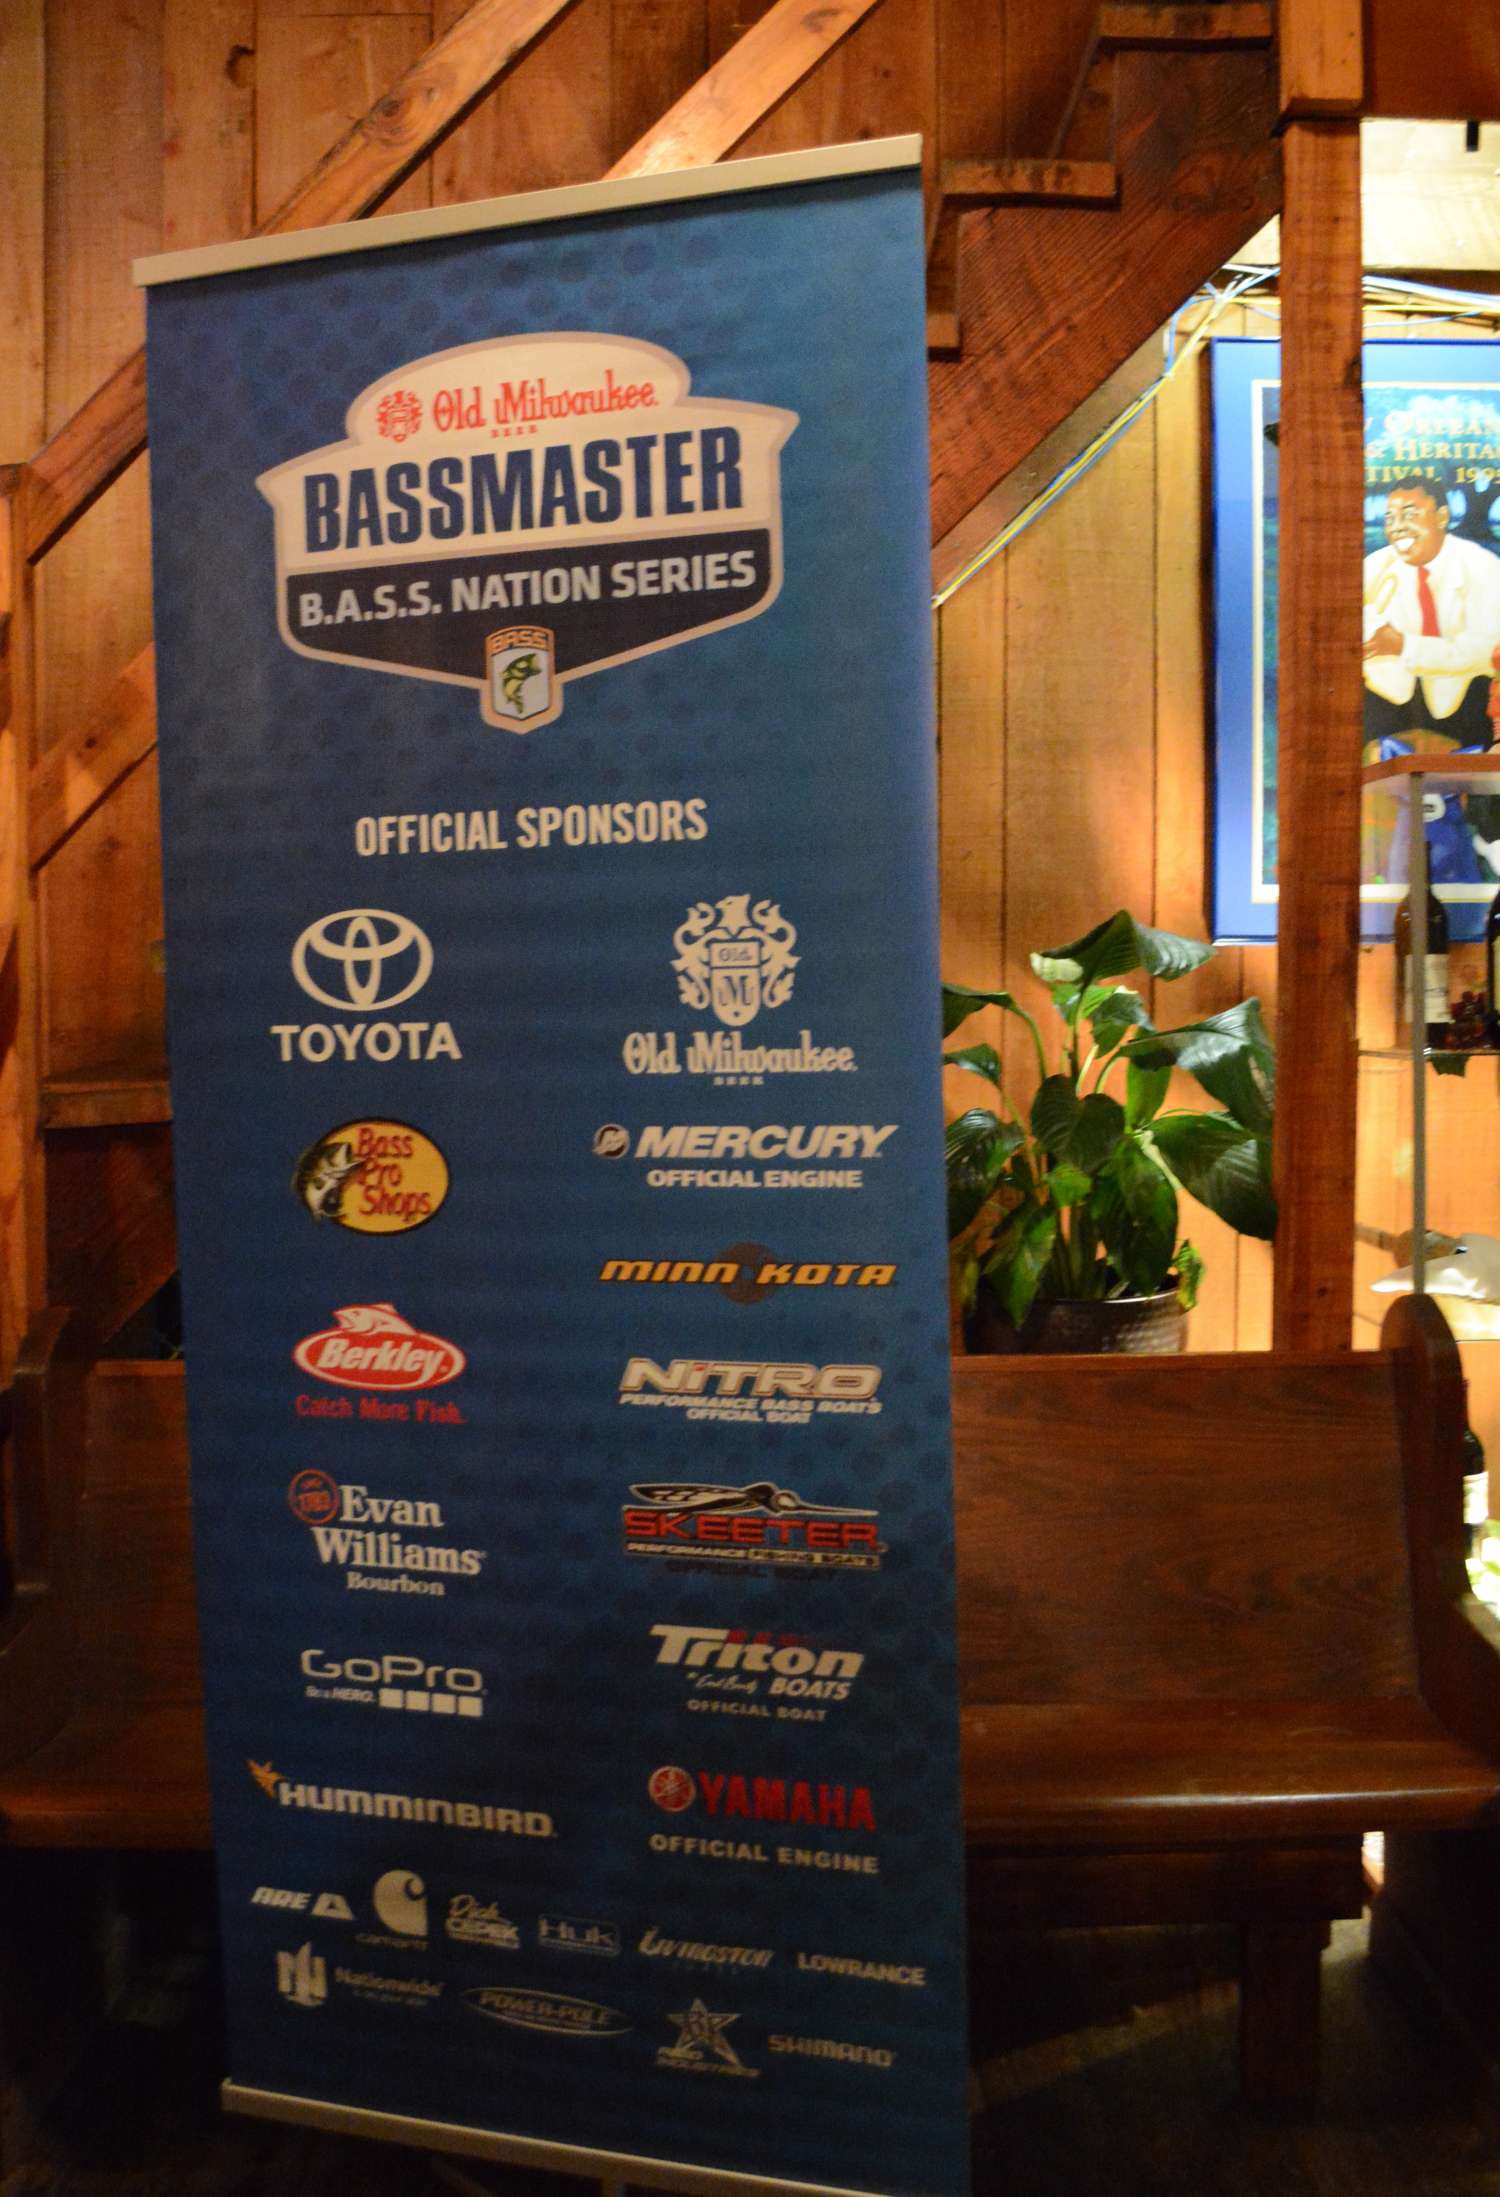 Just inside, anglers are greeted with the confirmation that they are indeed in the right place. The banner begins the start of the line competitors go through for registration.